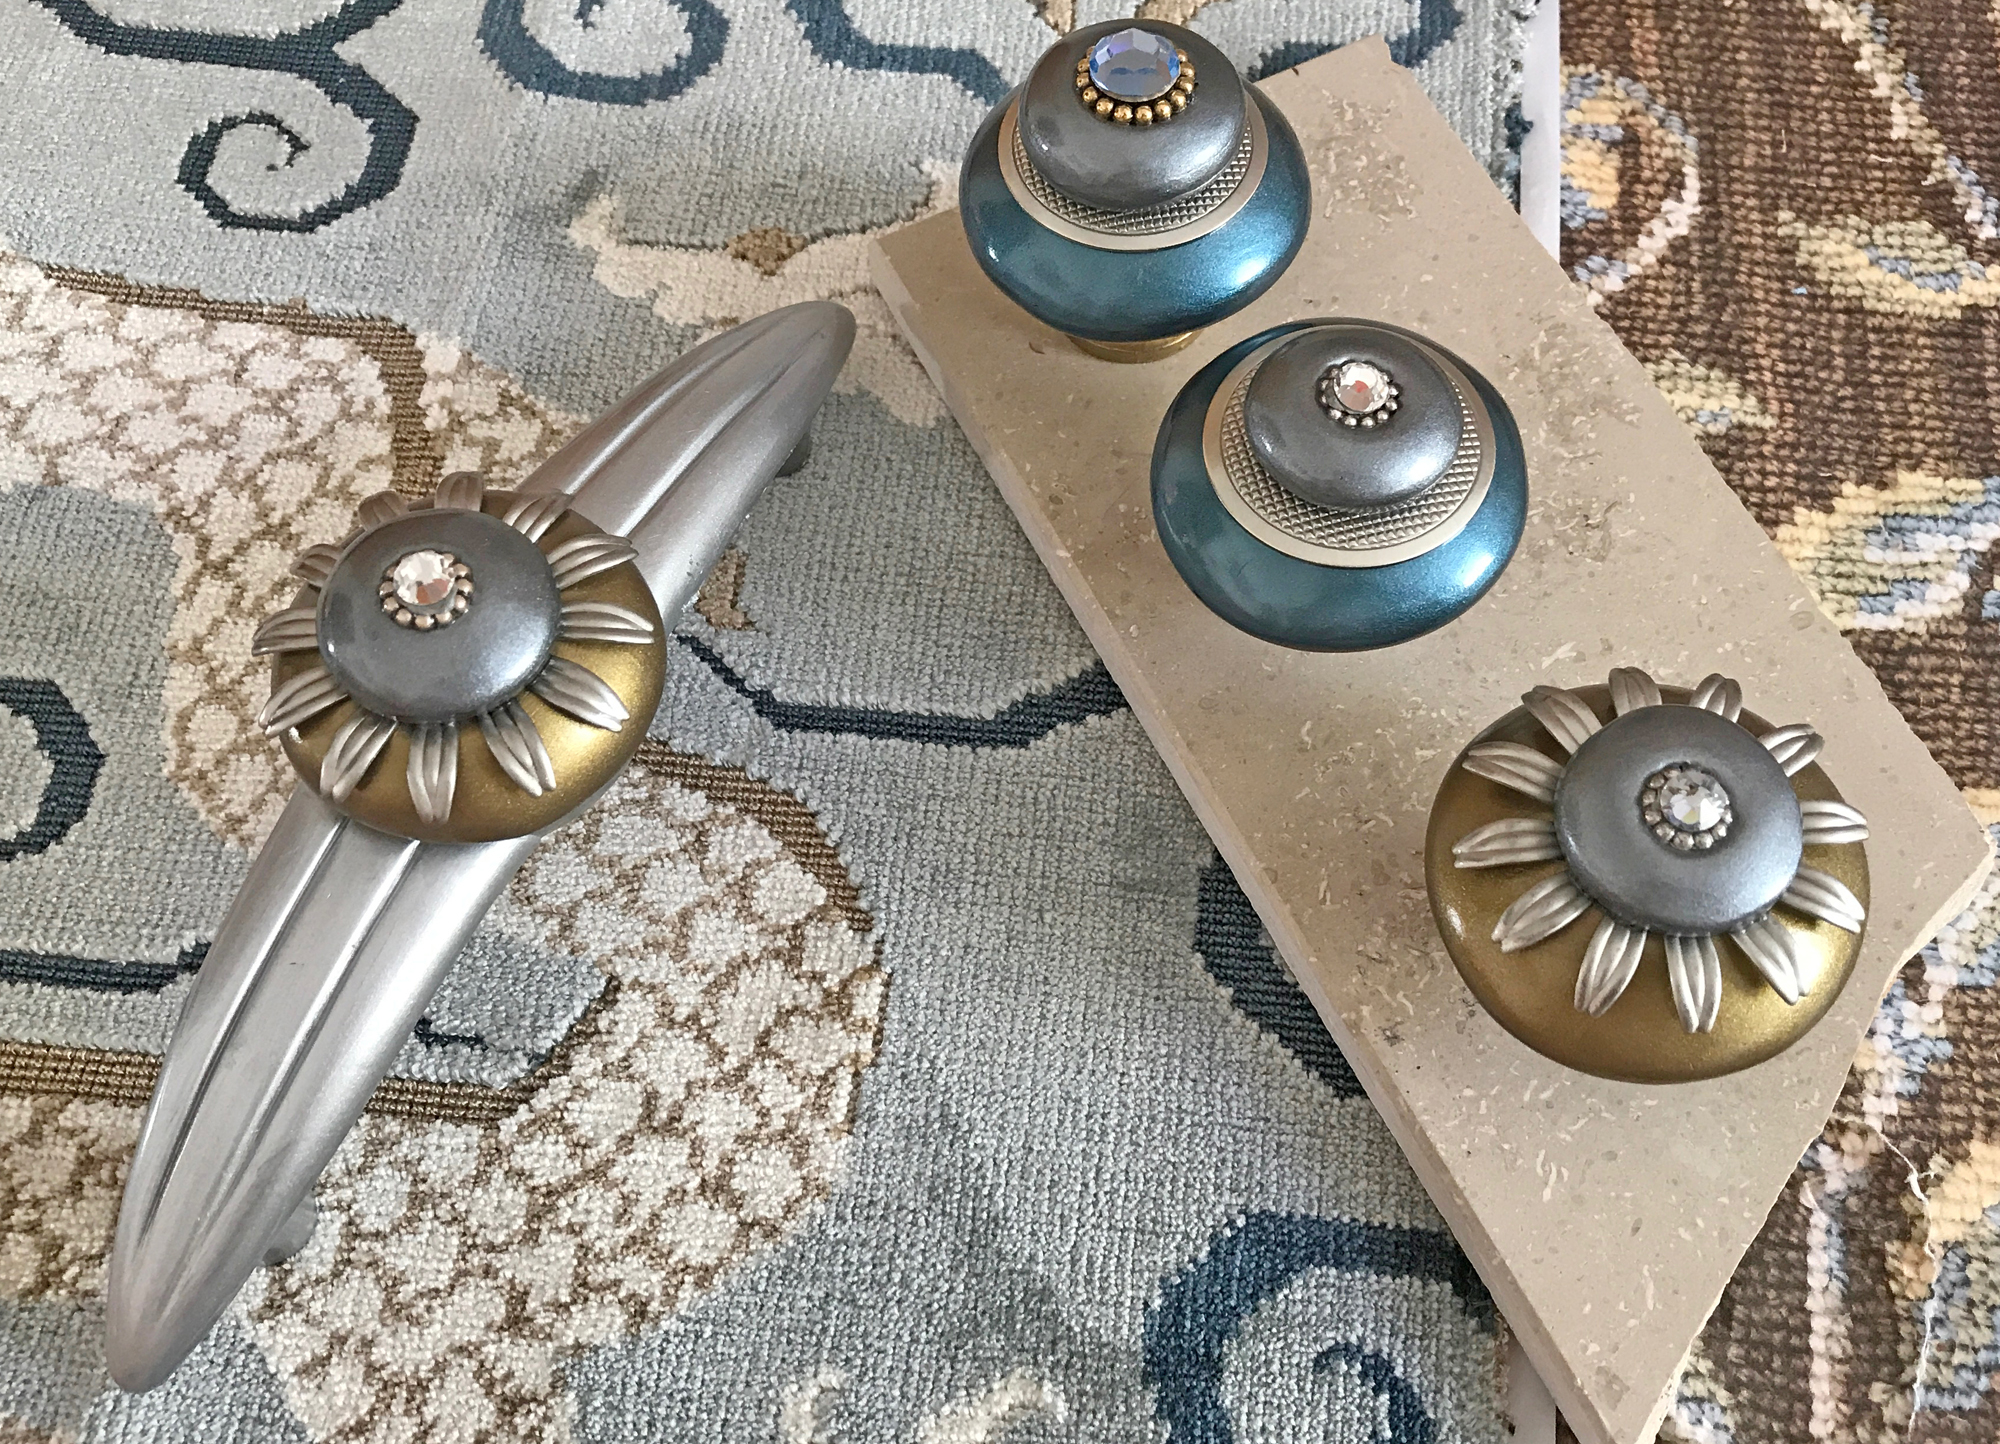  kitchen cabinet knobs and pulls sets